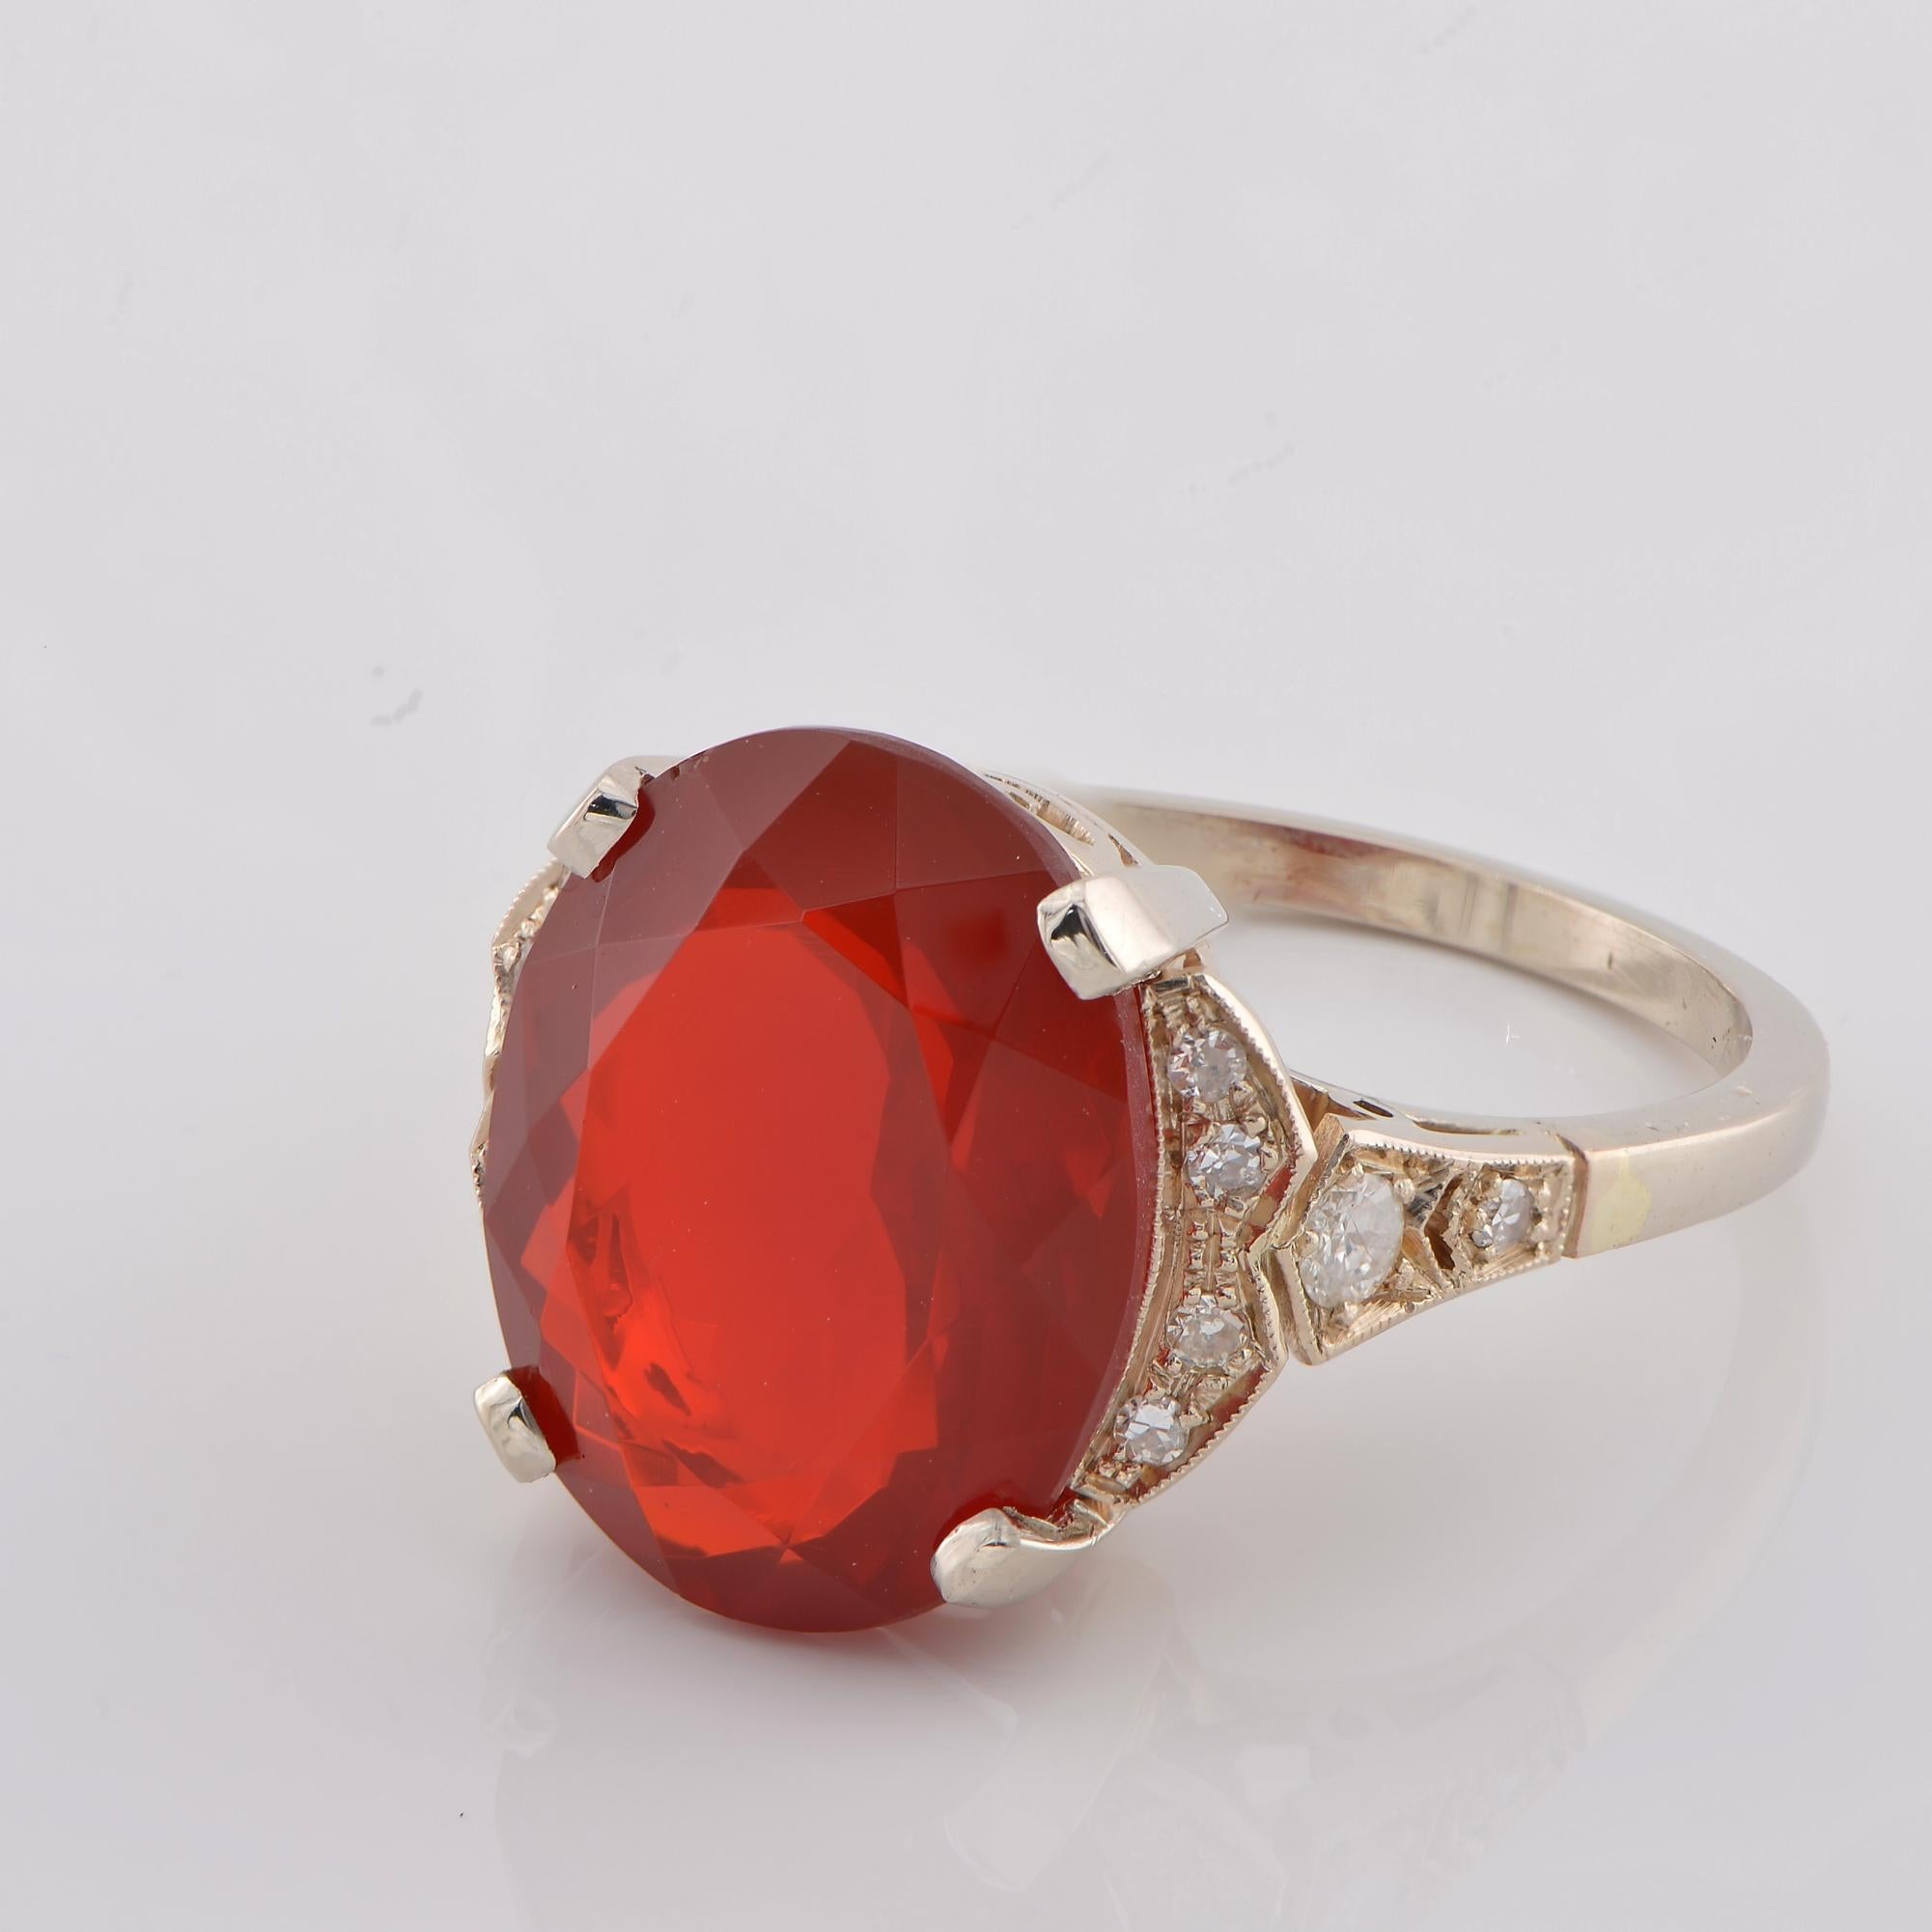 Contemporary Vintage Style 6.0 Ct. Ruby Red Fire Opal Diamond Solitaire ring For Sale